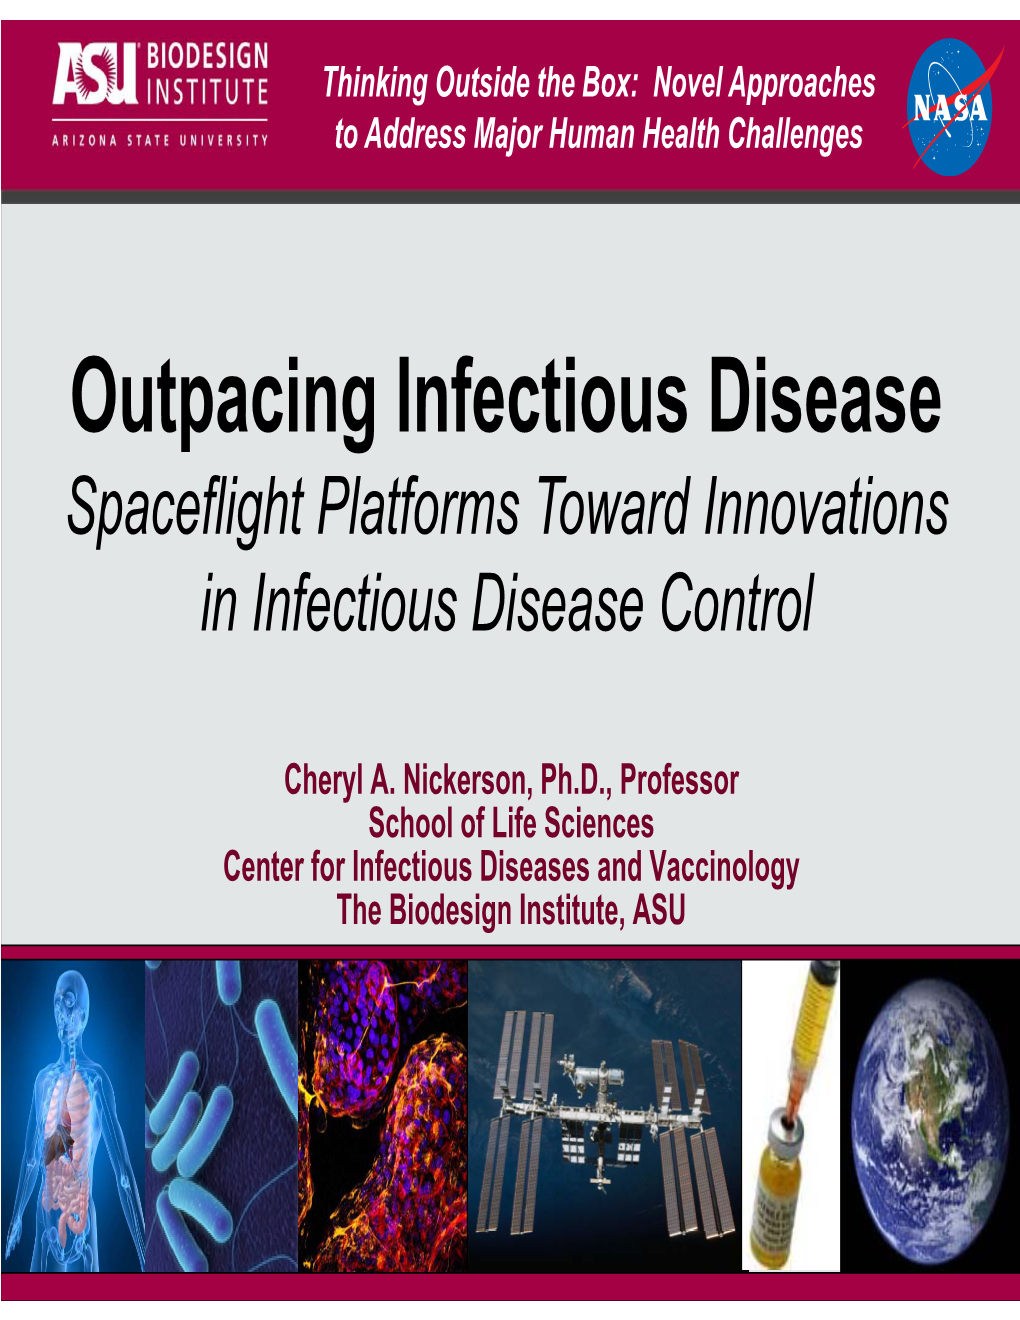 Outpacing Infectious Disease Spaceflight Platforms Toward Innovations in Infectious Disease Control